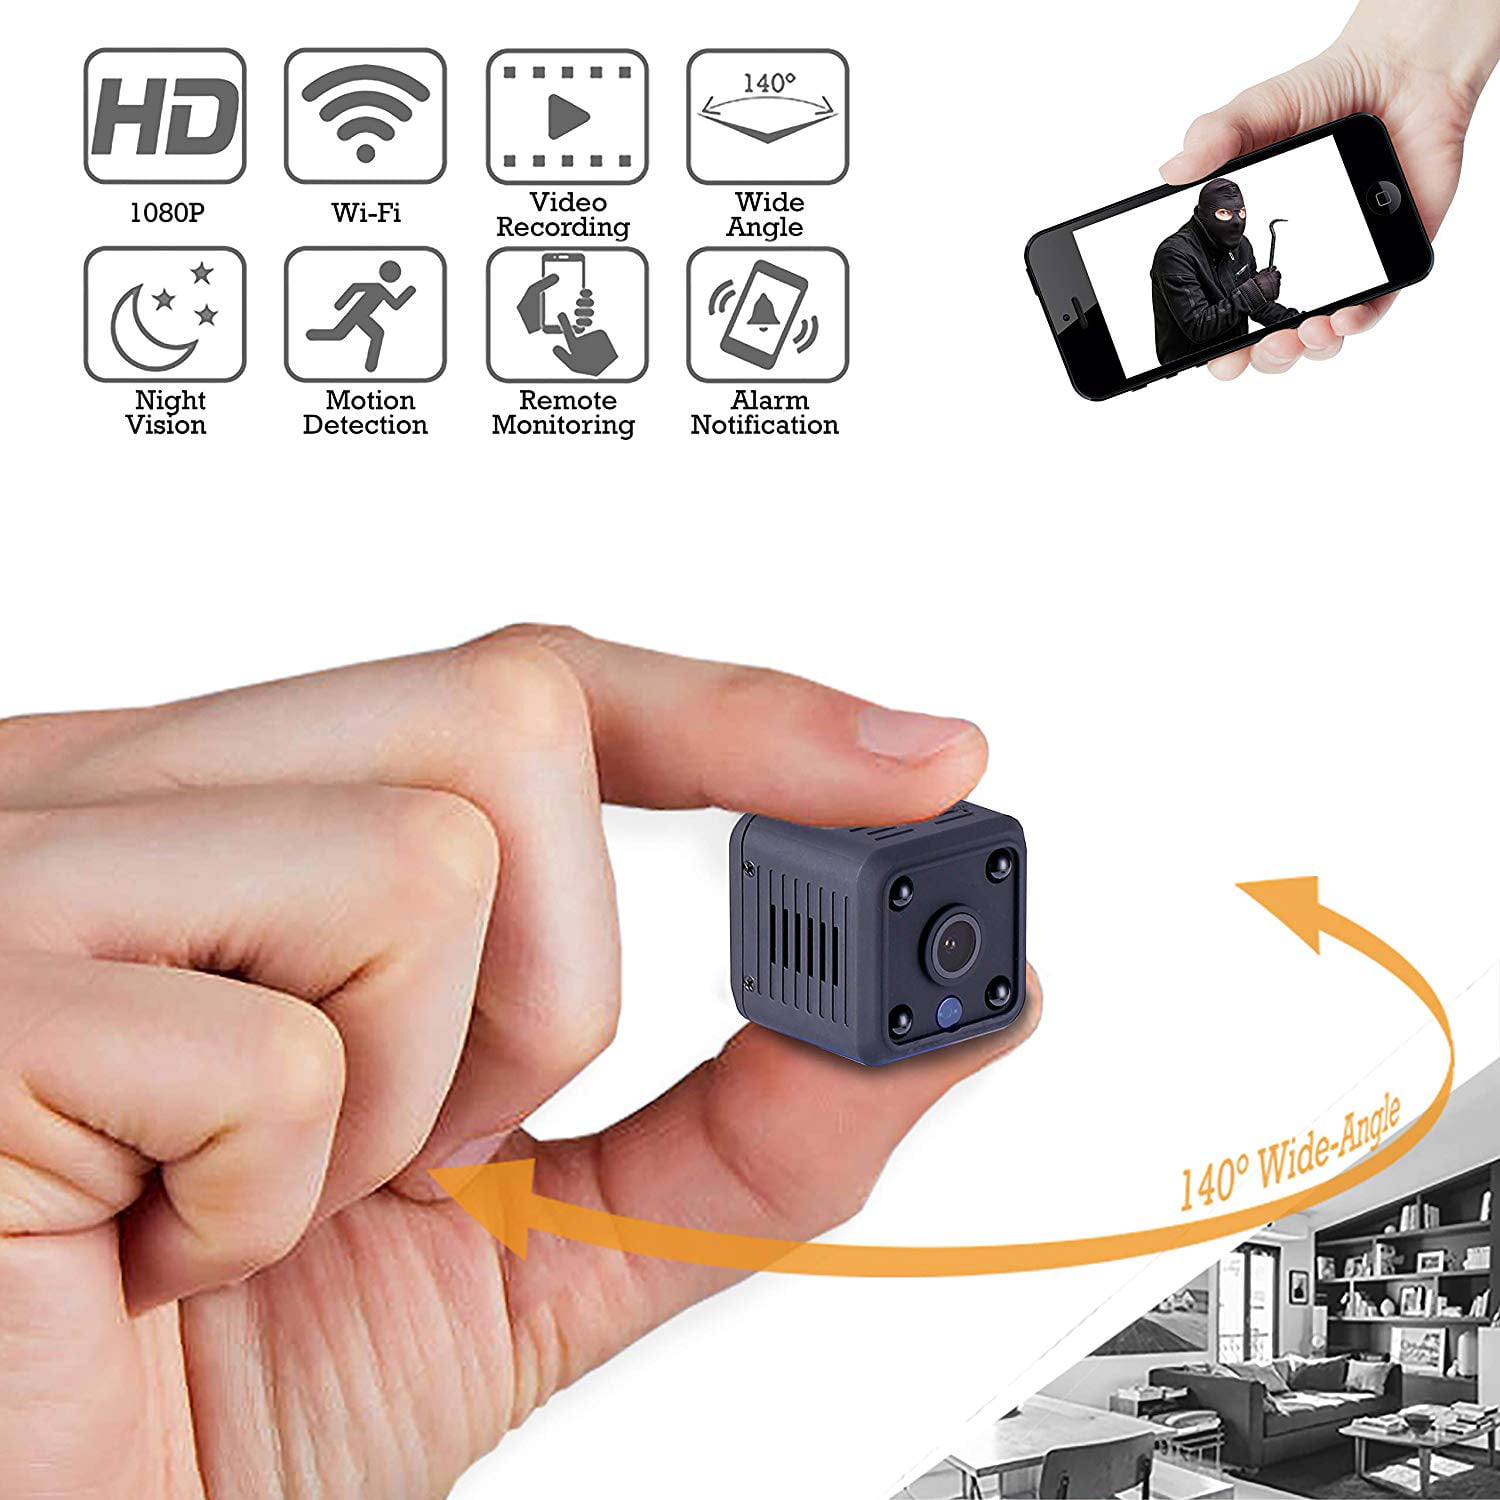 camera recorder for home